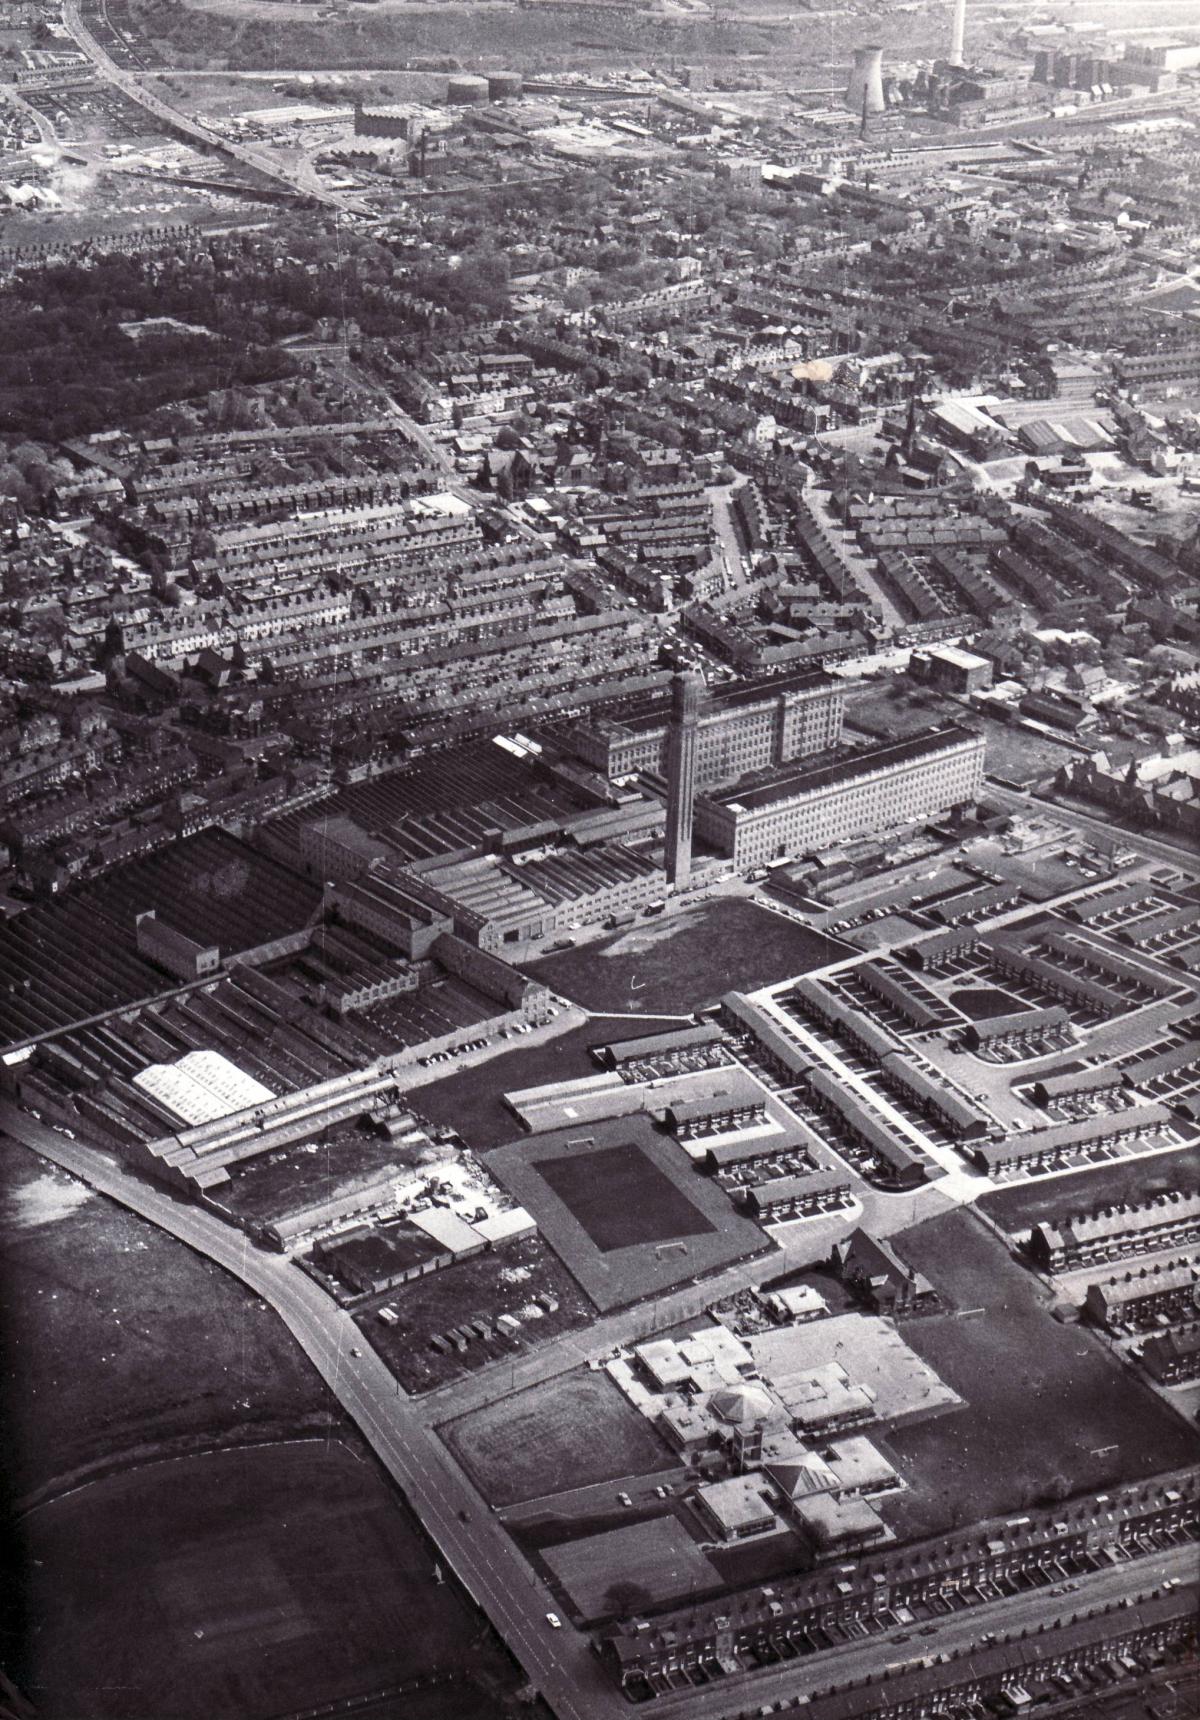 An aerial view of Lister Mill taken in 1982